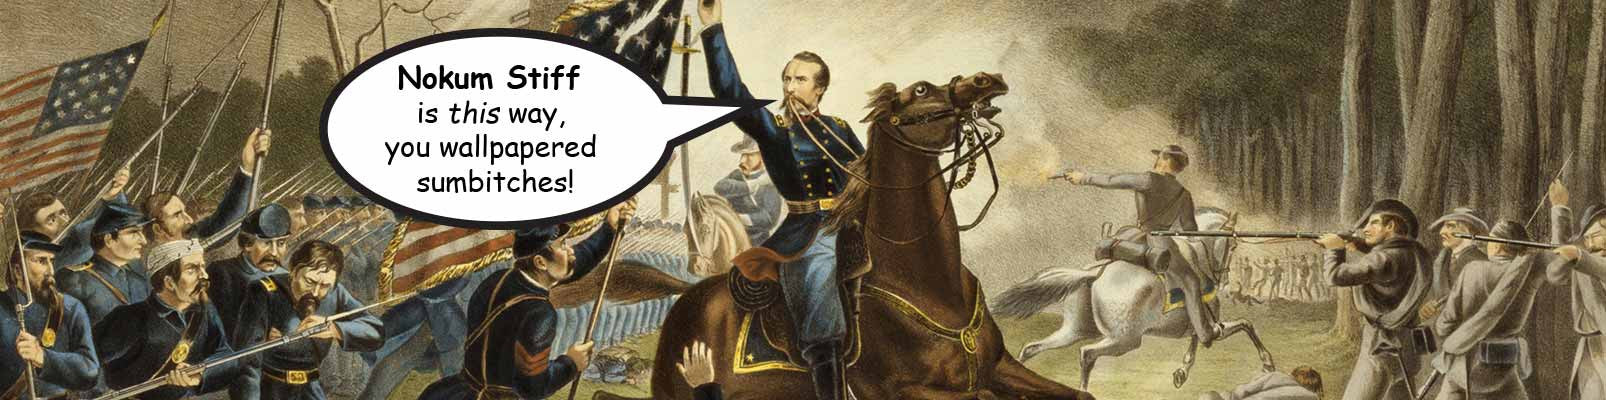 inkfiblog military slang civil war painting guy on horse yelling 'nokum stiff is this way you wallpapered sumbitches'